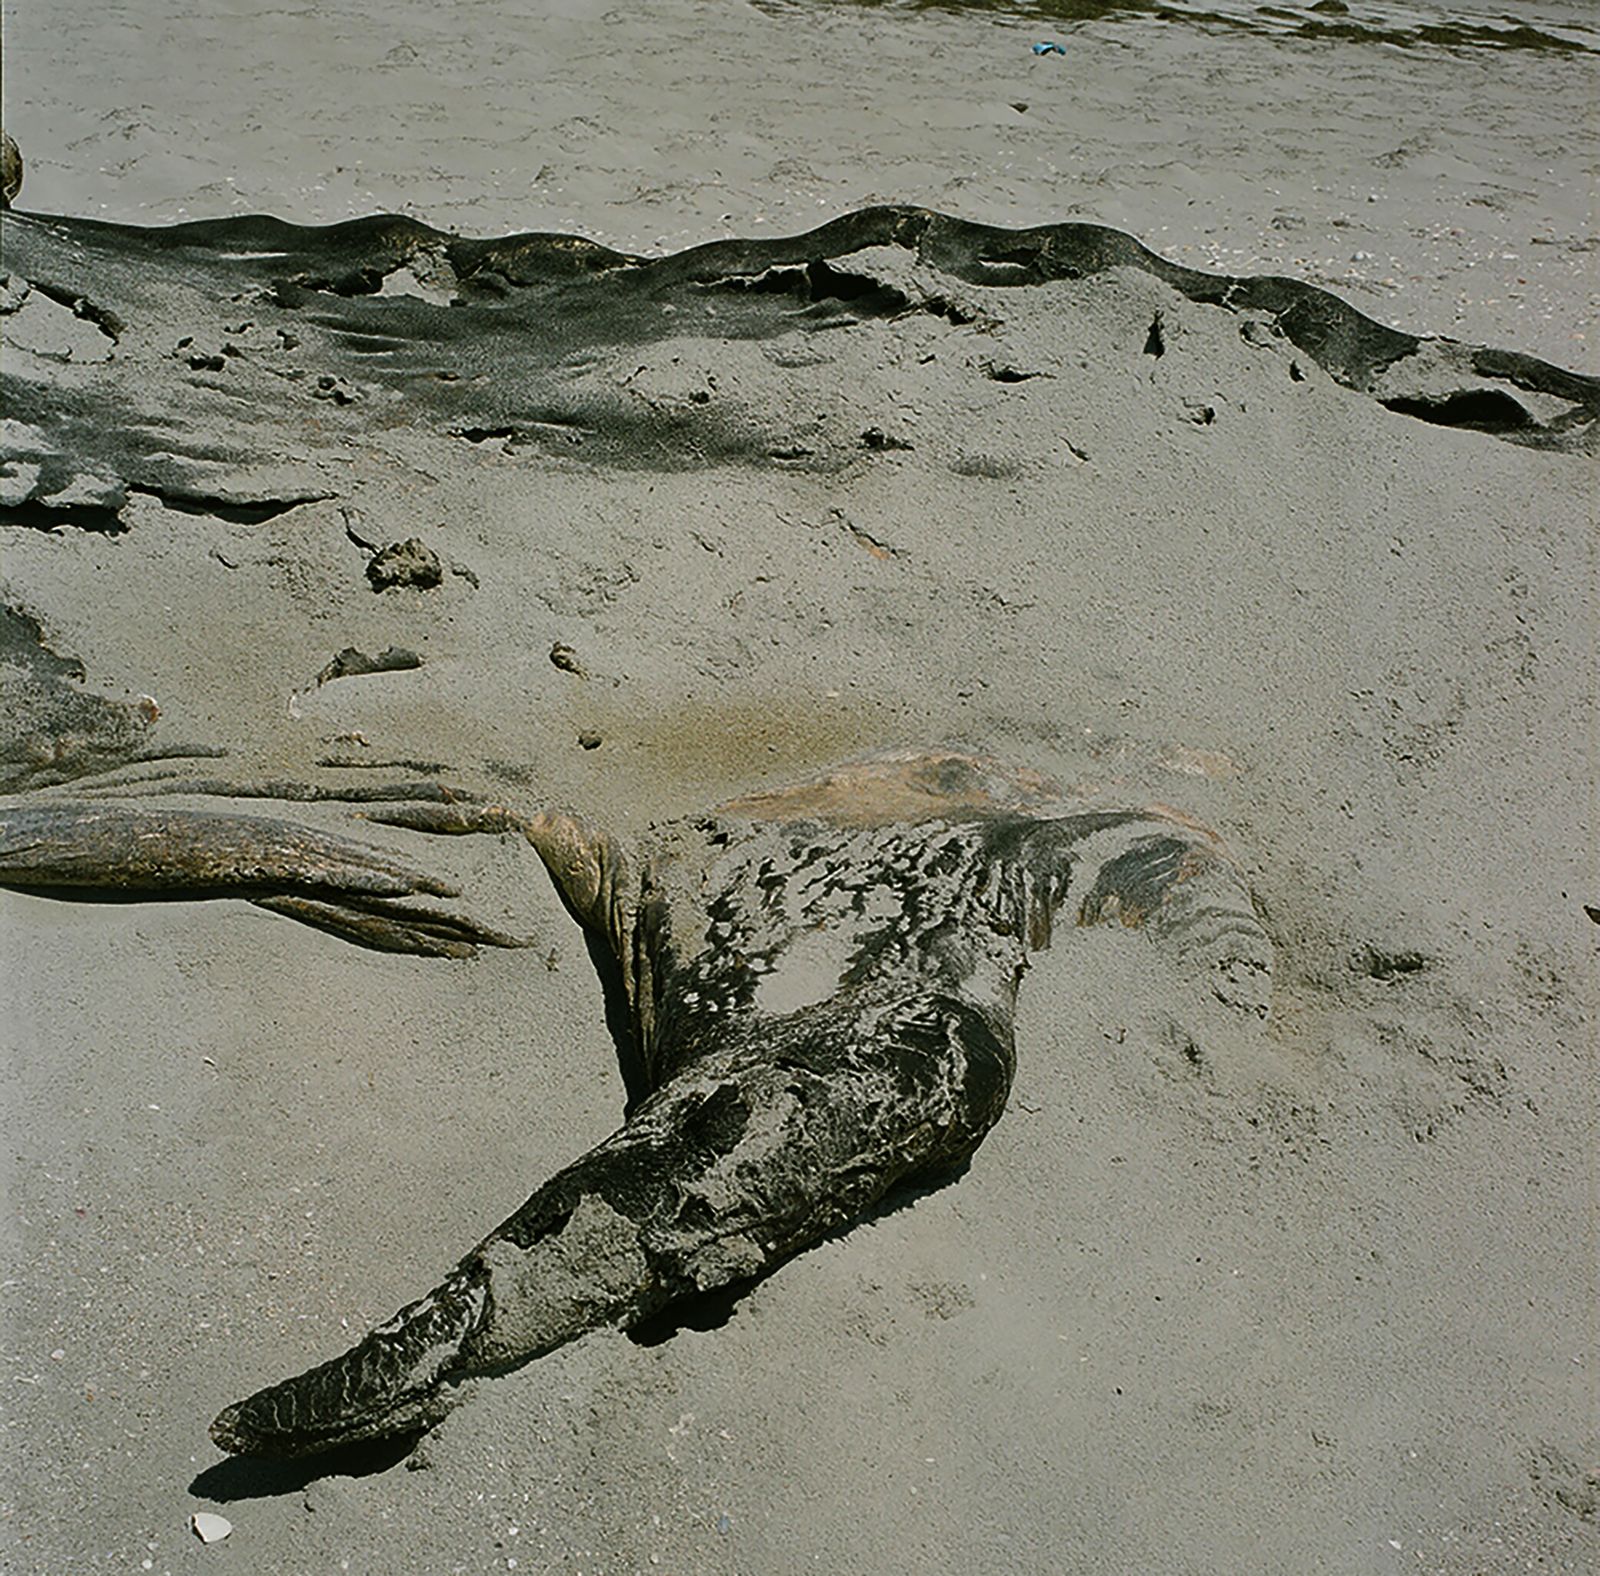 © Angélica Escoto - Image from the "They go stranded" photography project